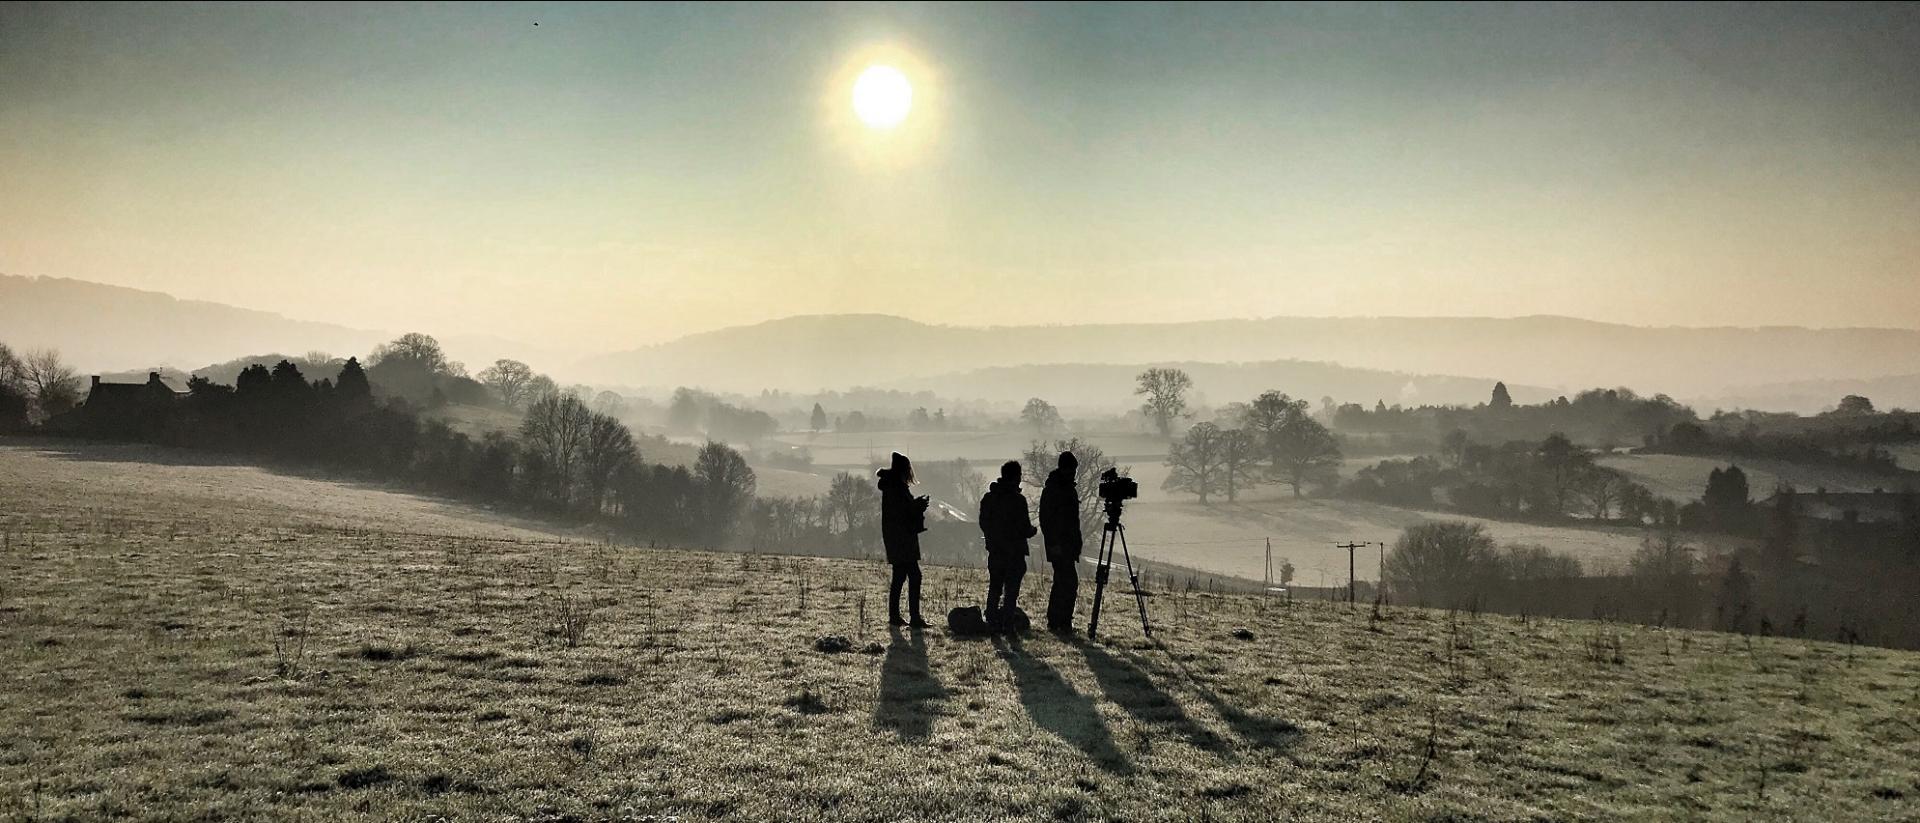 a small film crew standing in a field overlooking a misty valley